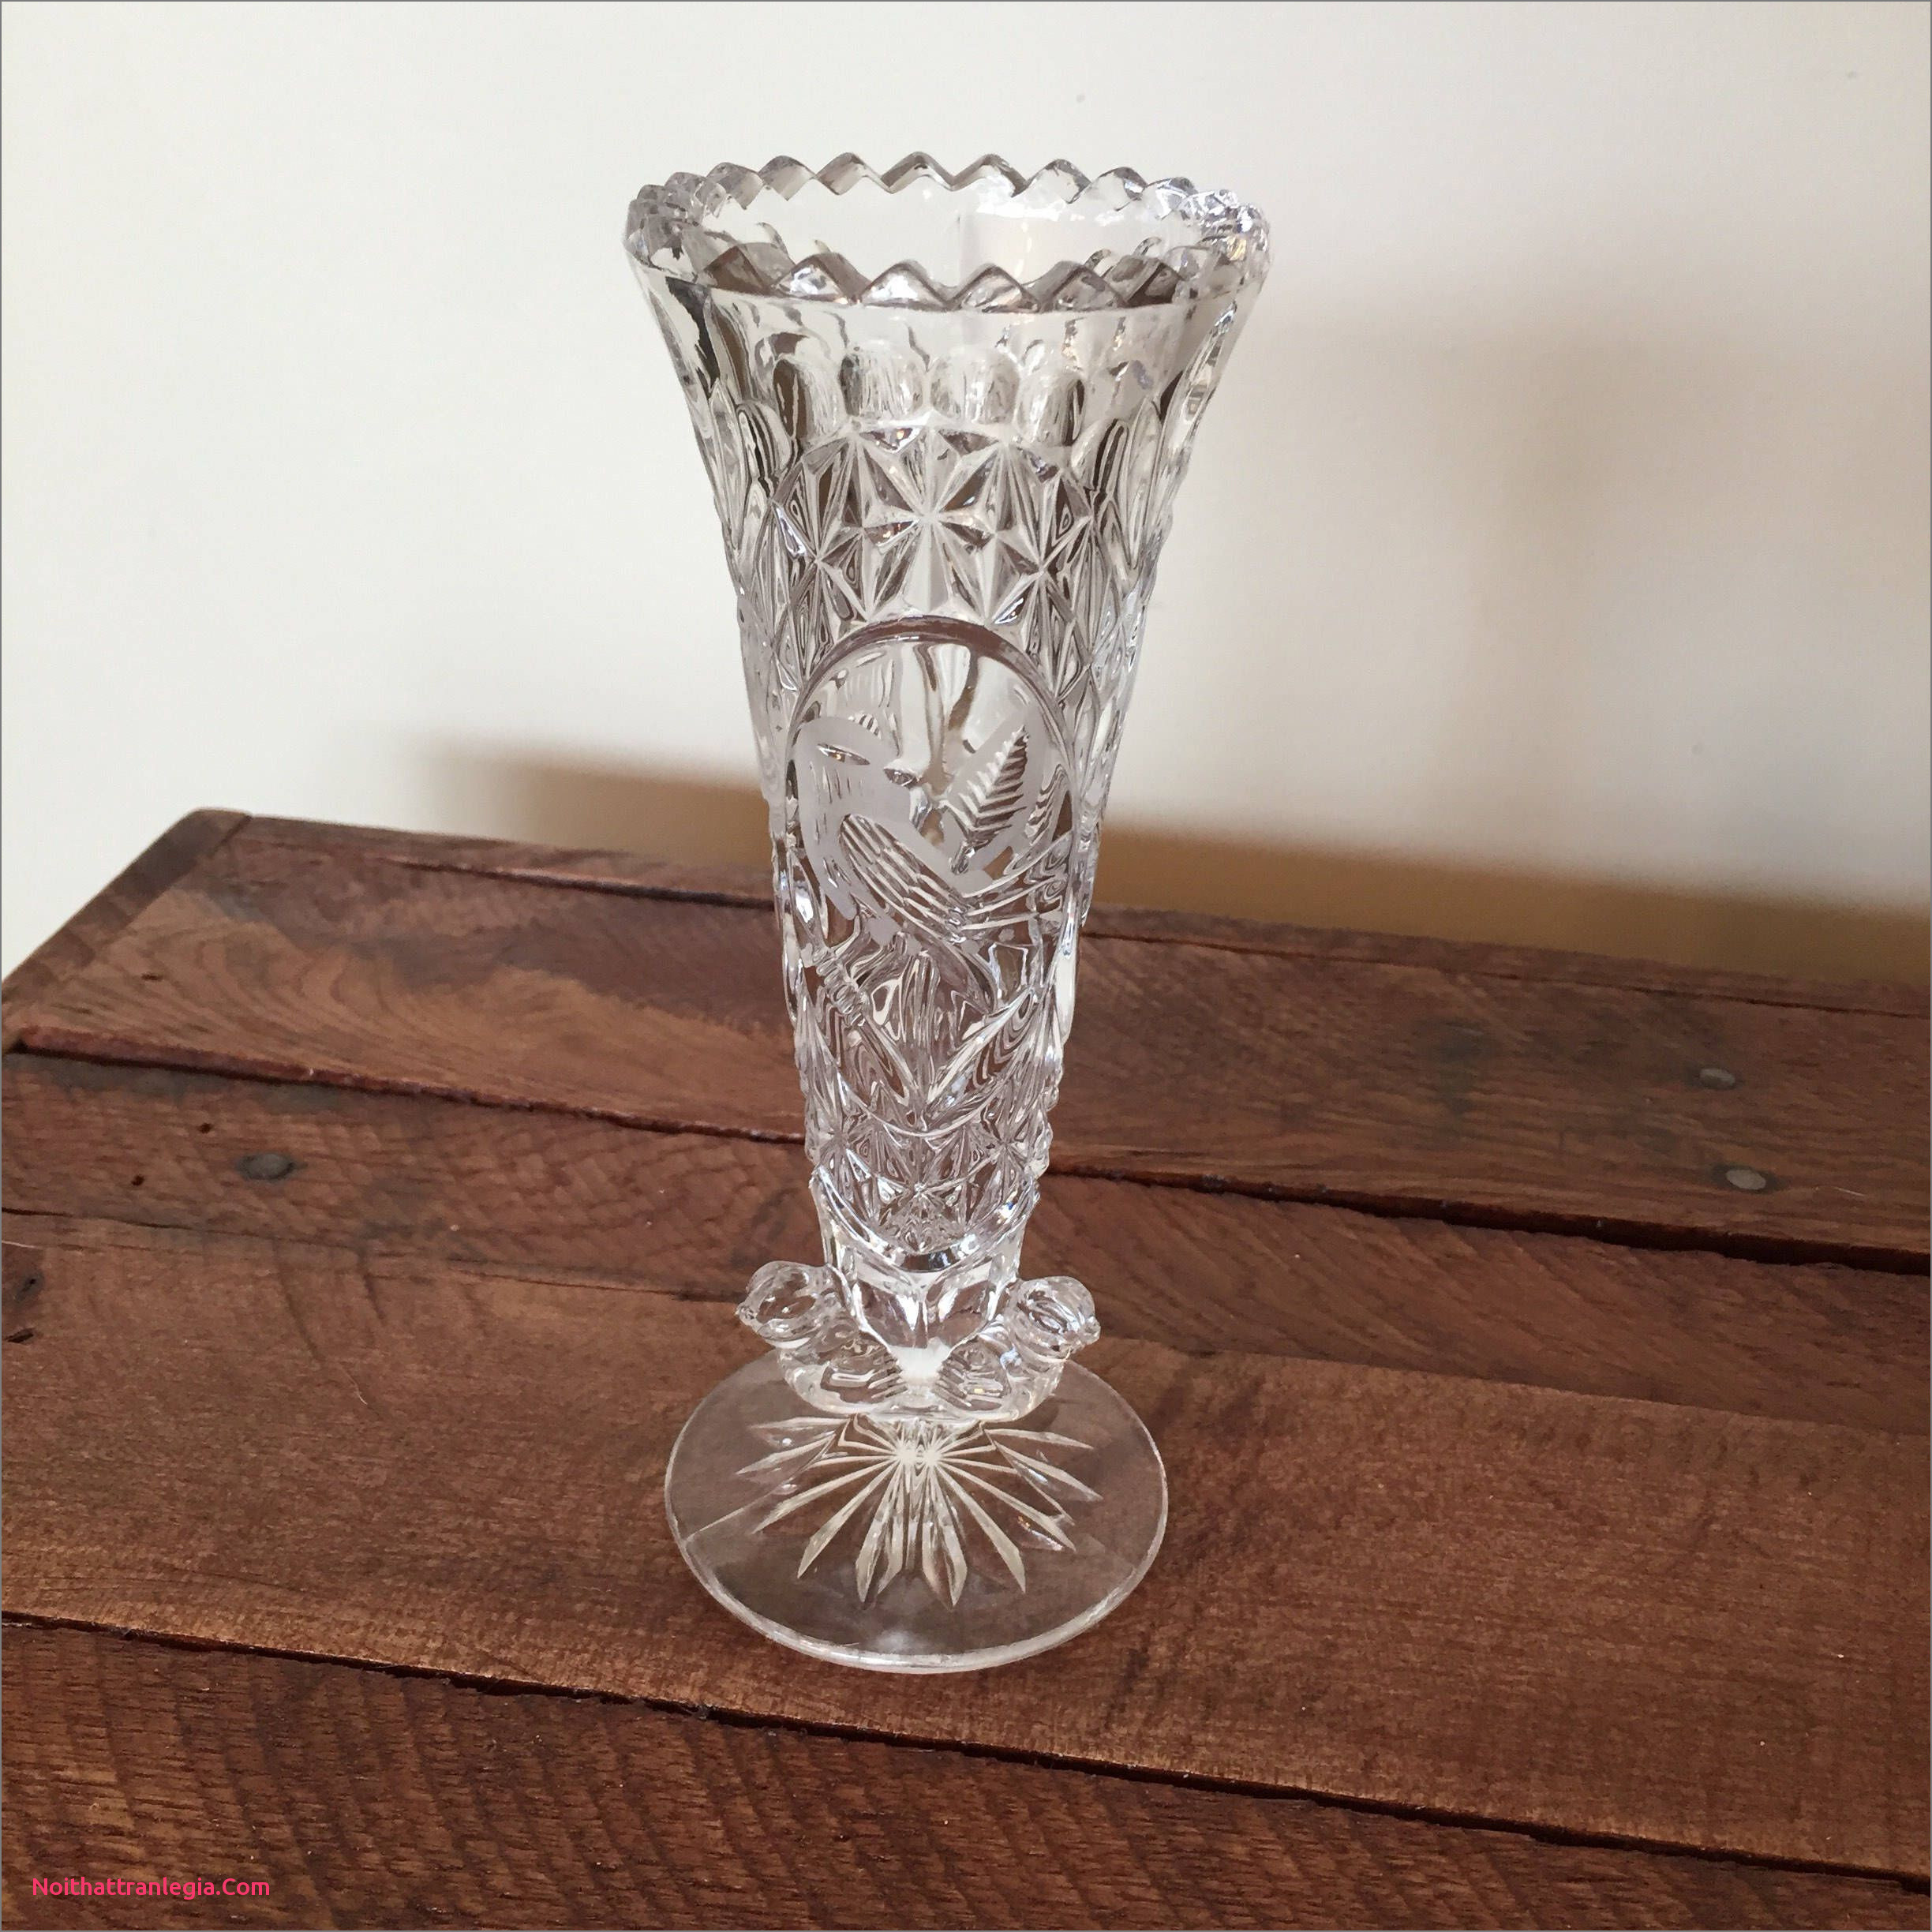 30 Nice 20 Glass Eiffel tower Vases 2024 free download 20 glass eiffel tower vases of 20 cut glass antique vase noithattranlegia vases design pertaining to cut glass antique vase elegant vintage cut glass bird vase etched glass vase three glass 